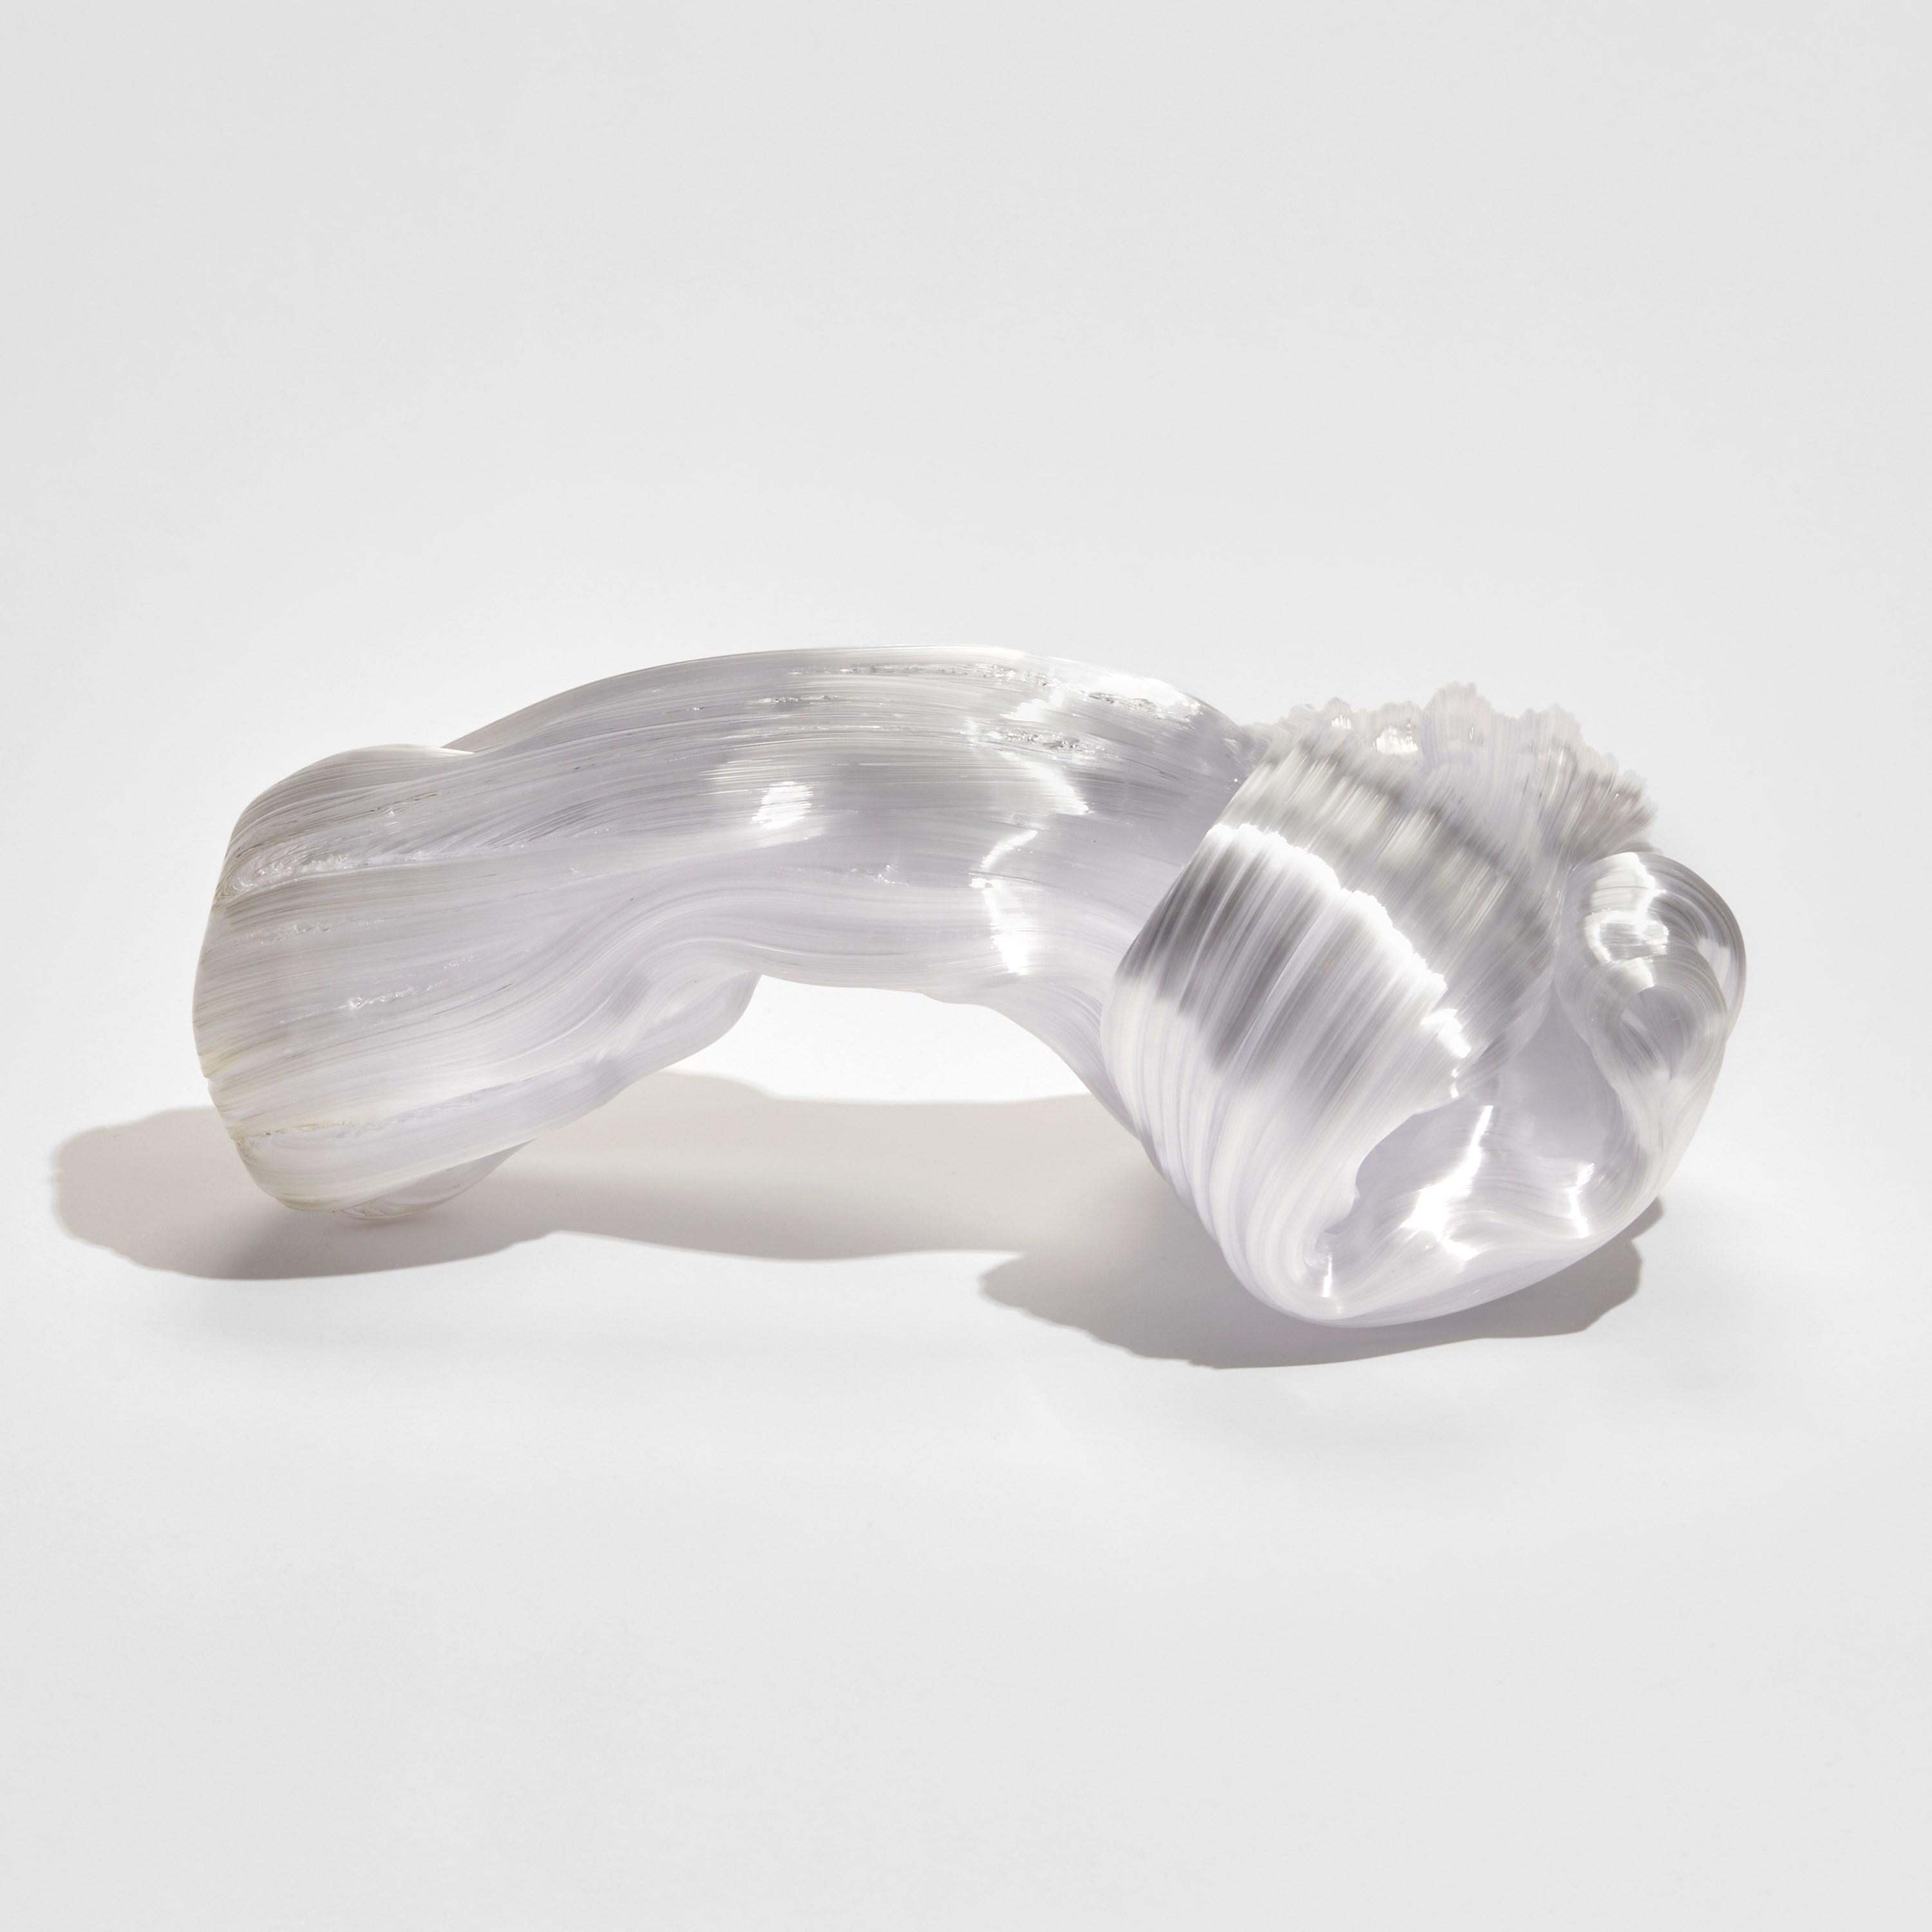 Hand-Crafted  Around in White, a Unique Abstract Glass Sculpture by Maria Bang Espersen